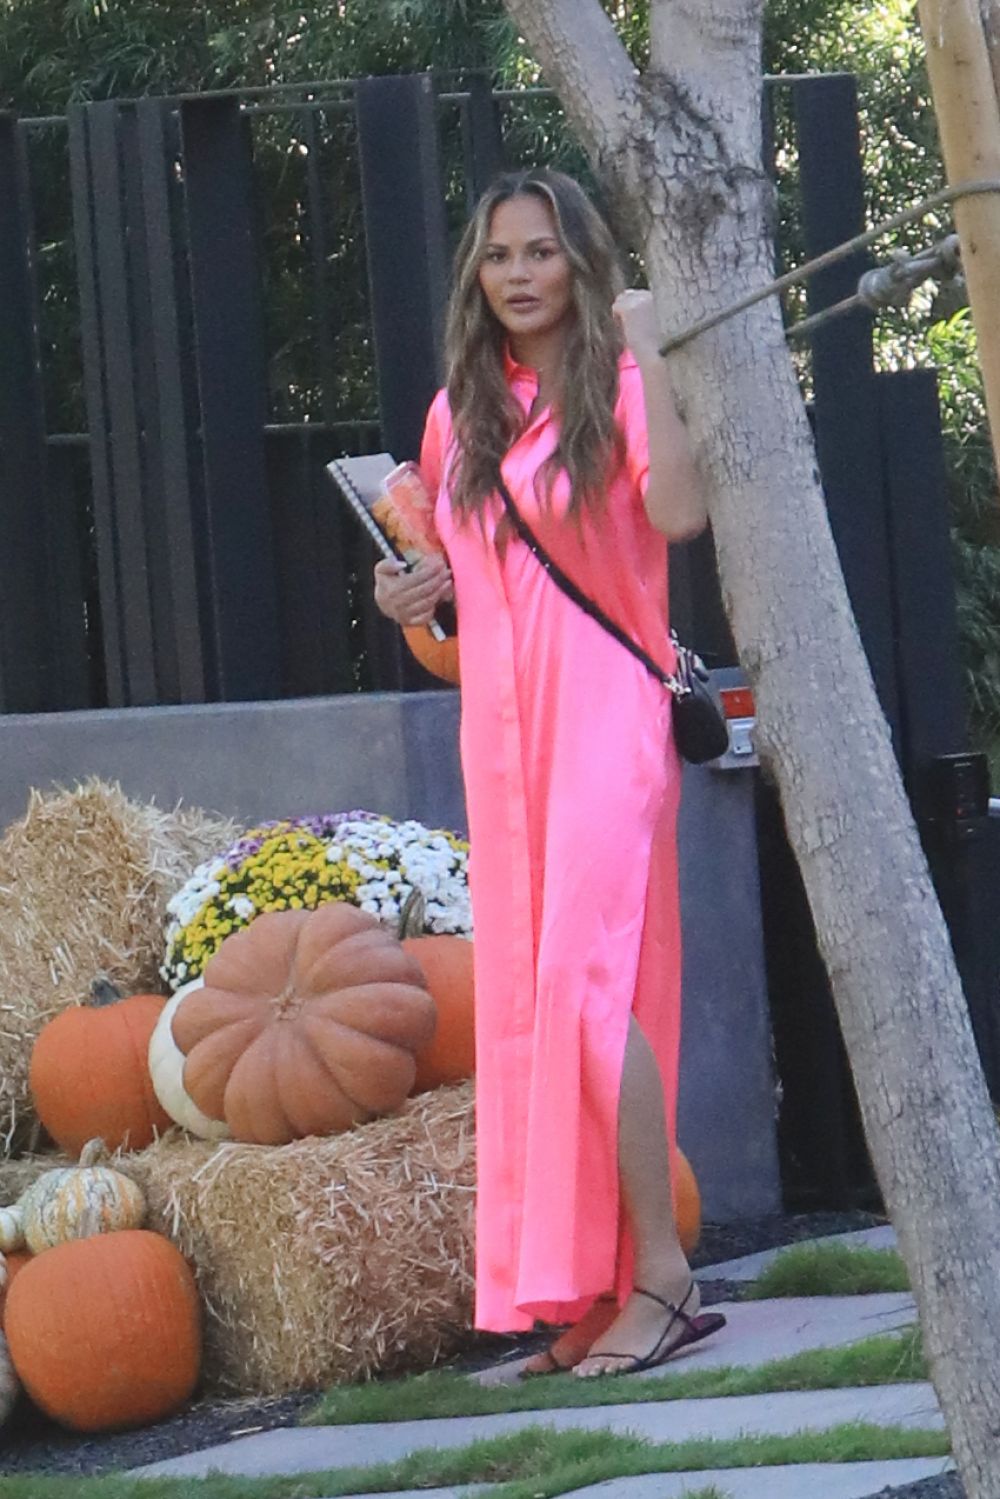 Chrissy Teigen in Pink Outfit at a Pumpkin Farm in Los Angeles 2020/10/25